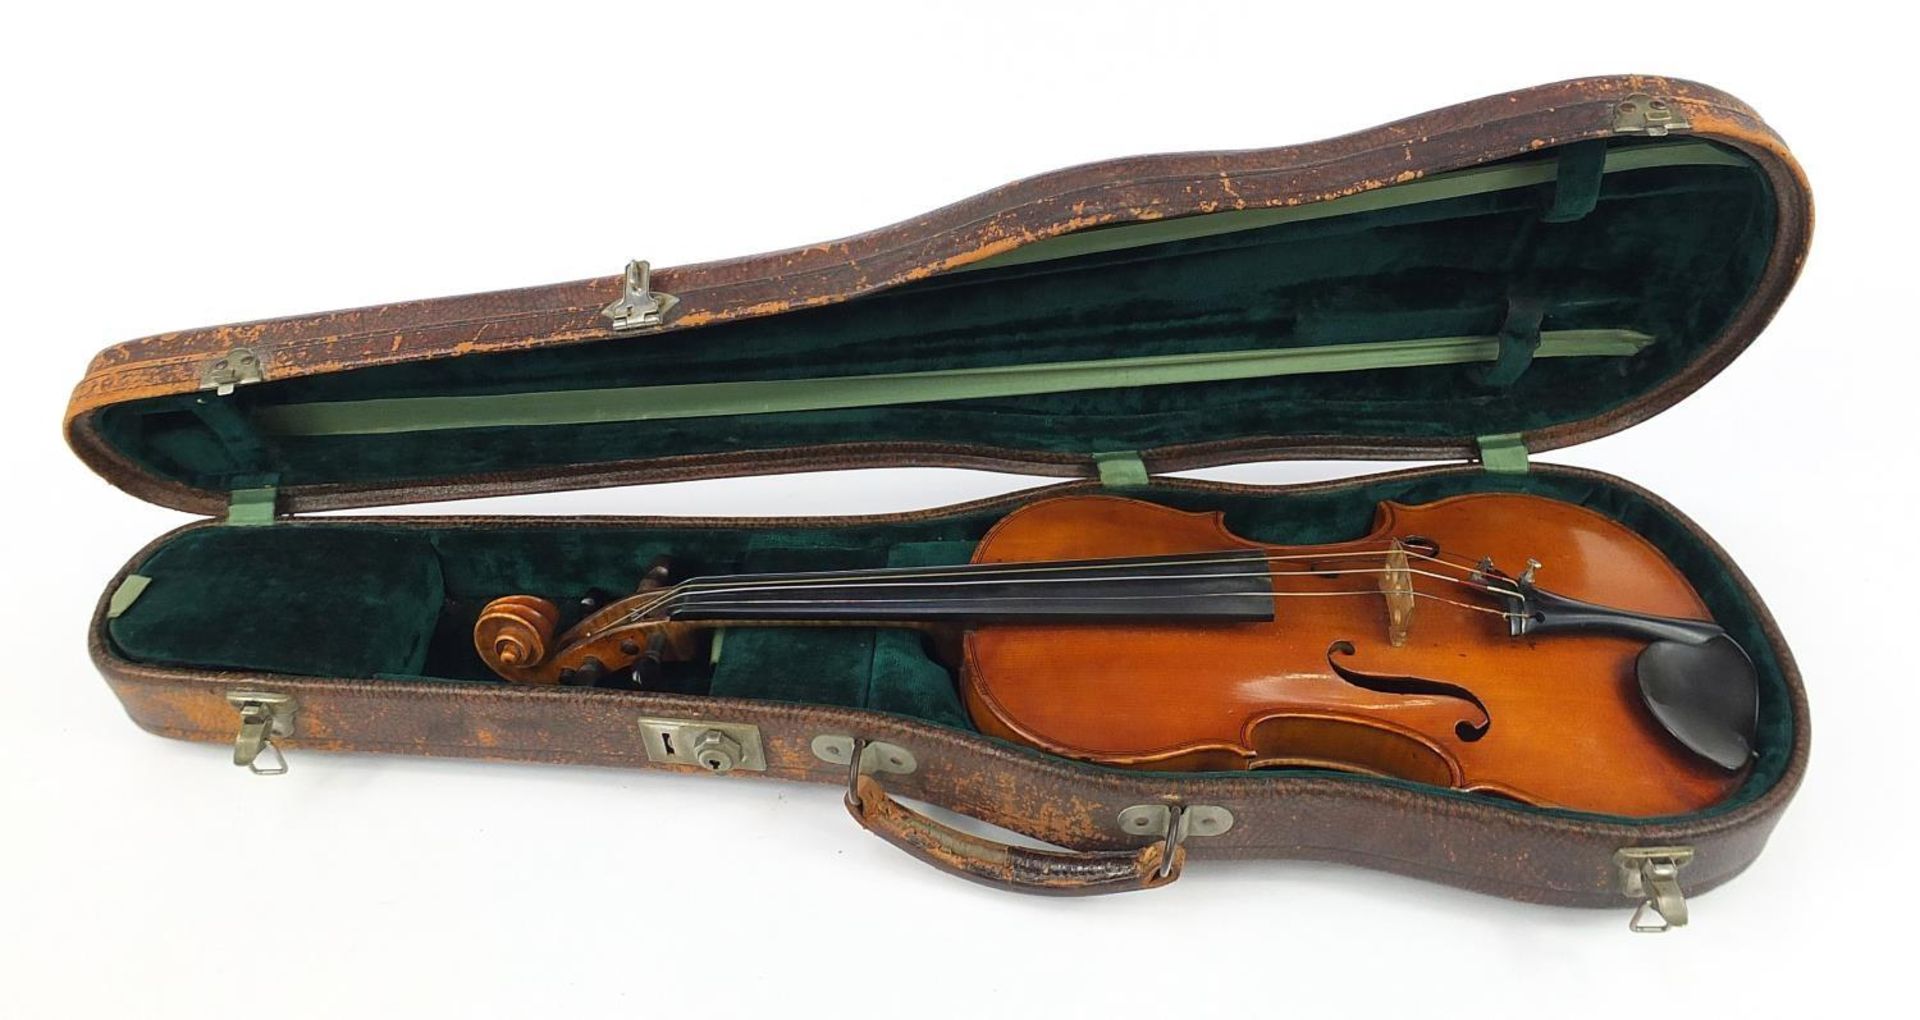 Old wooden violin bearing an Andre Castagneri paper label, the violin back 14 inches in length - Image 8 of 10